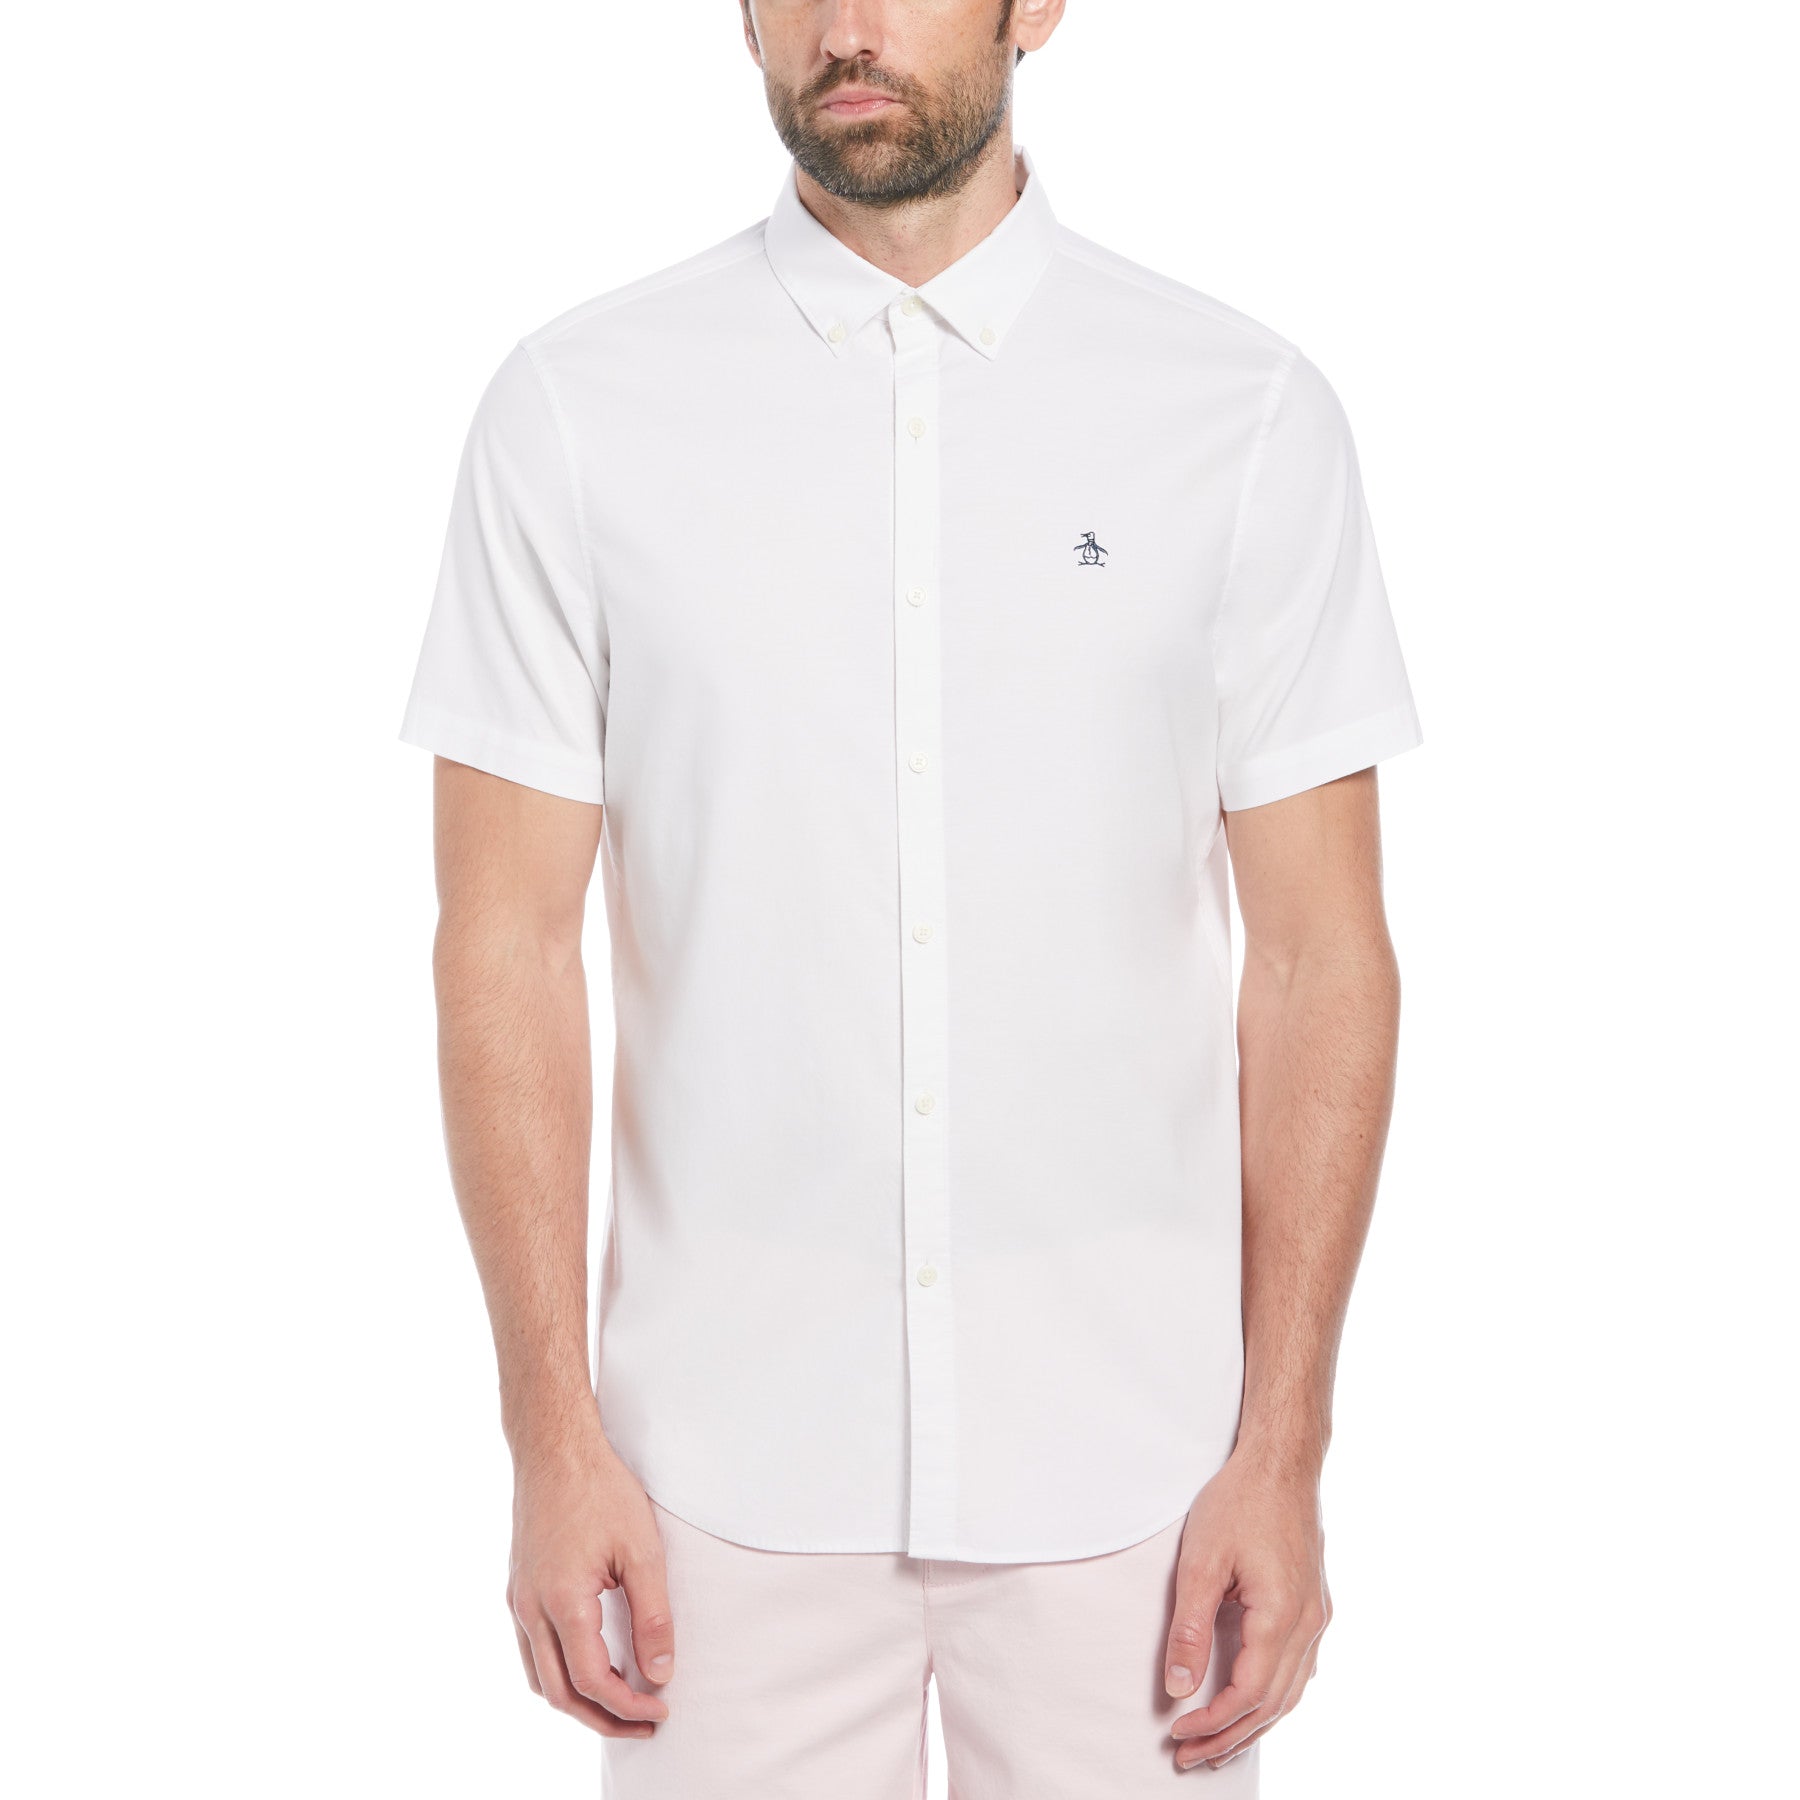 View Ecovero Oxford Stretch Short Sleeve ButtonDown Shirt In Bright White information